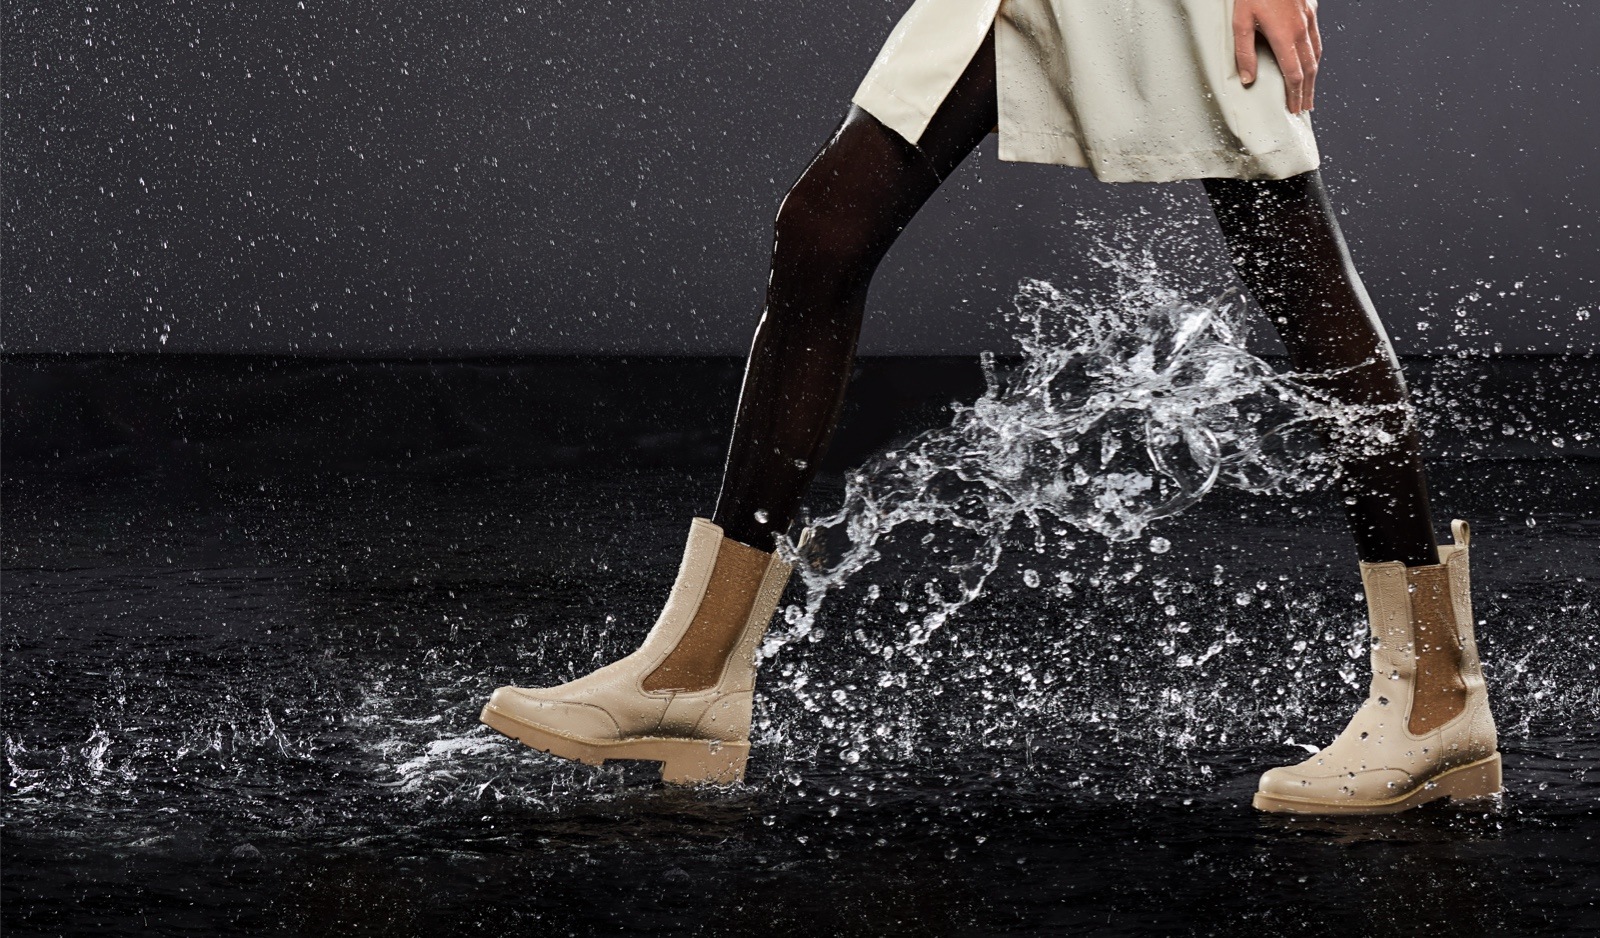 weather ready boots splashing through a puddle